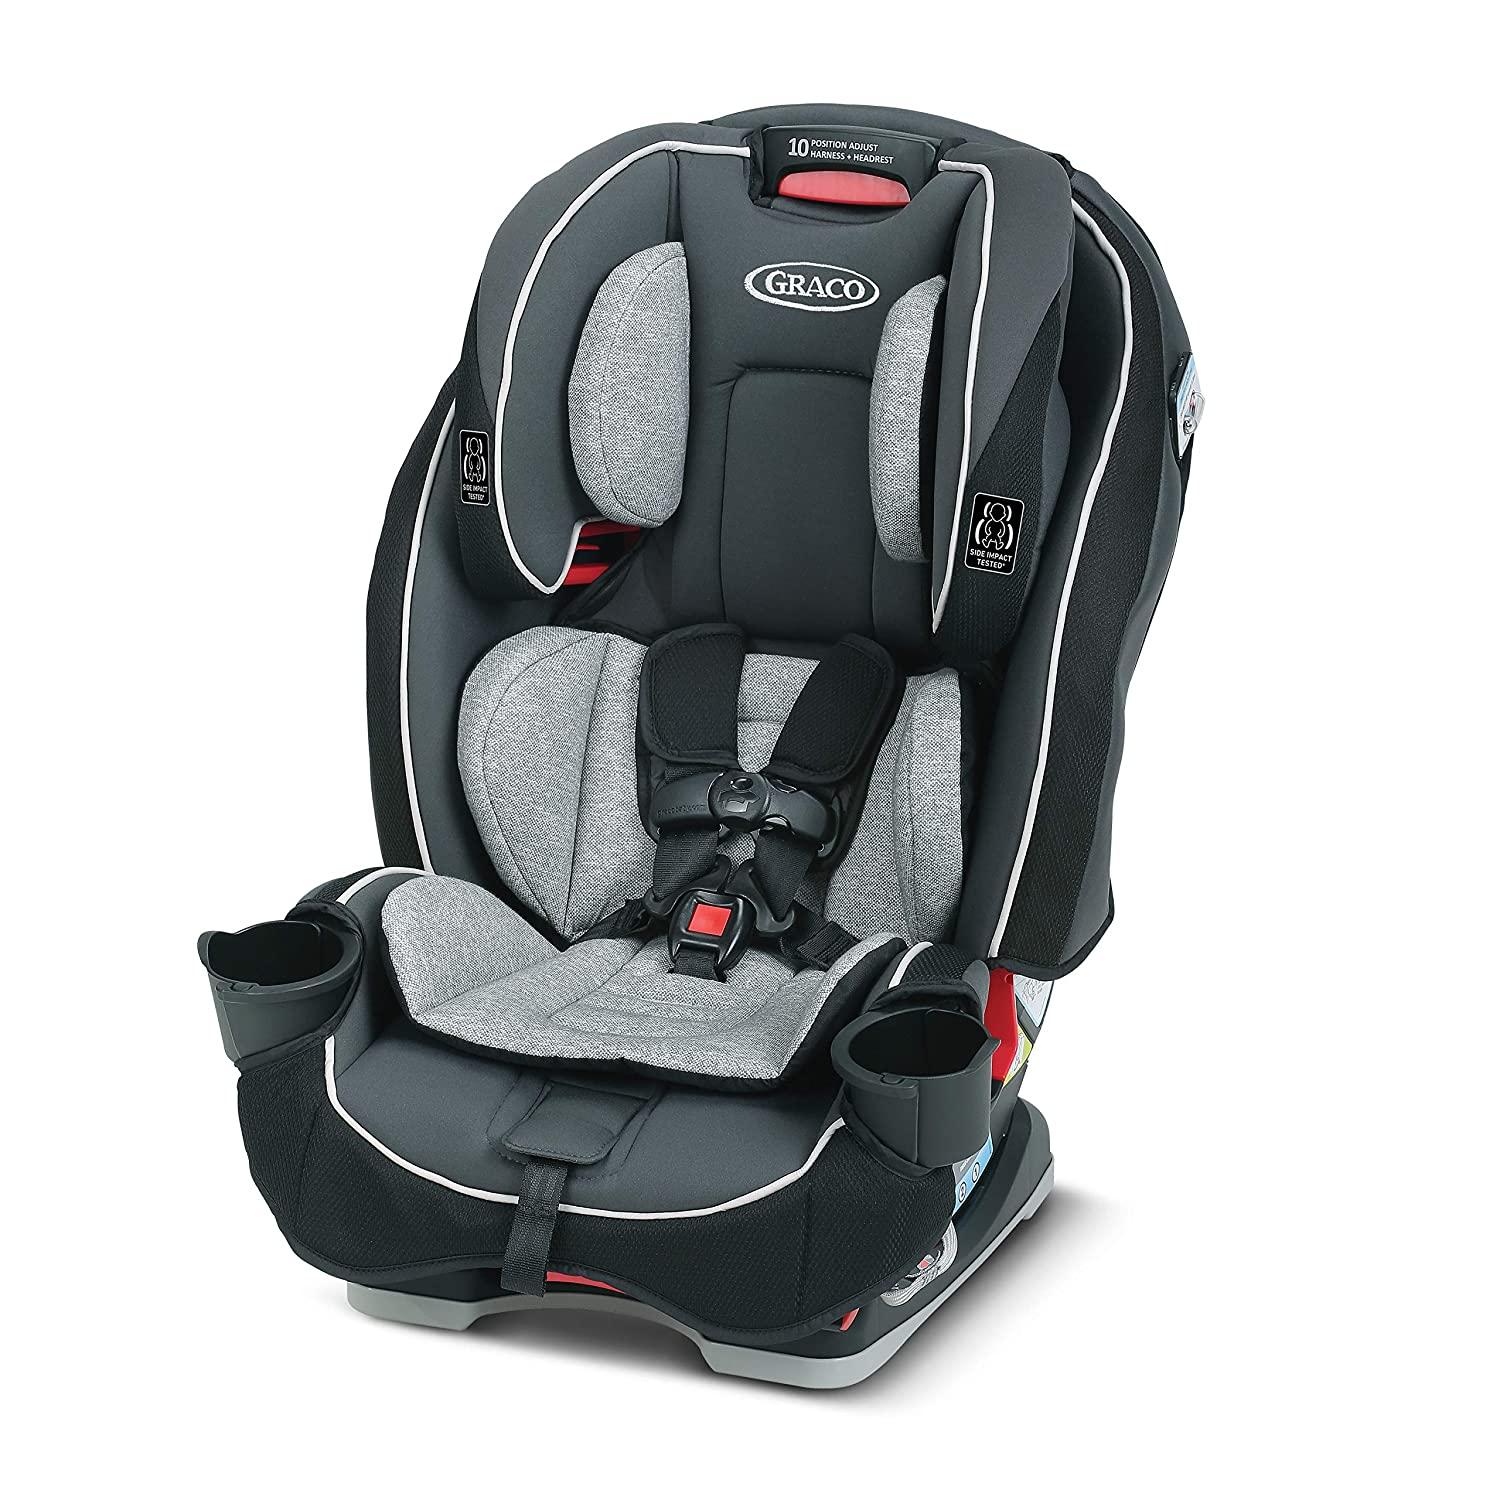 Graco SlimFit 3-in-1 Car Seat for $119.98 Shipped